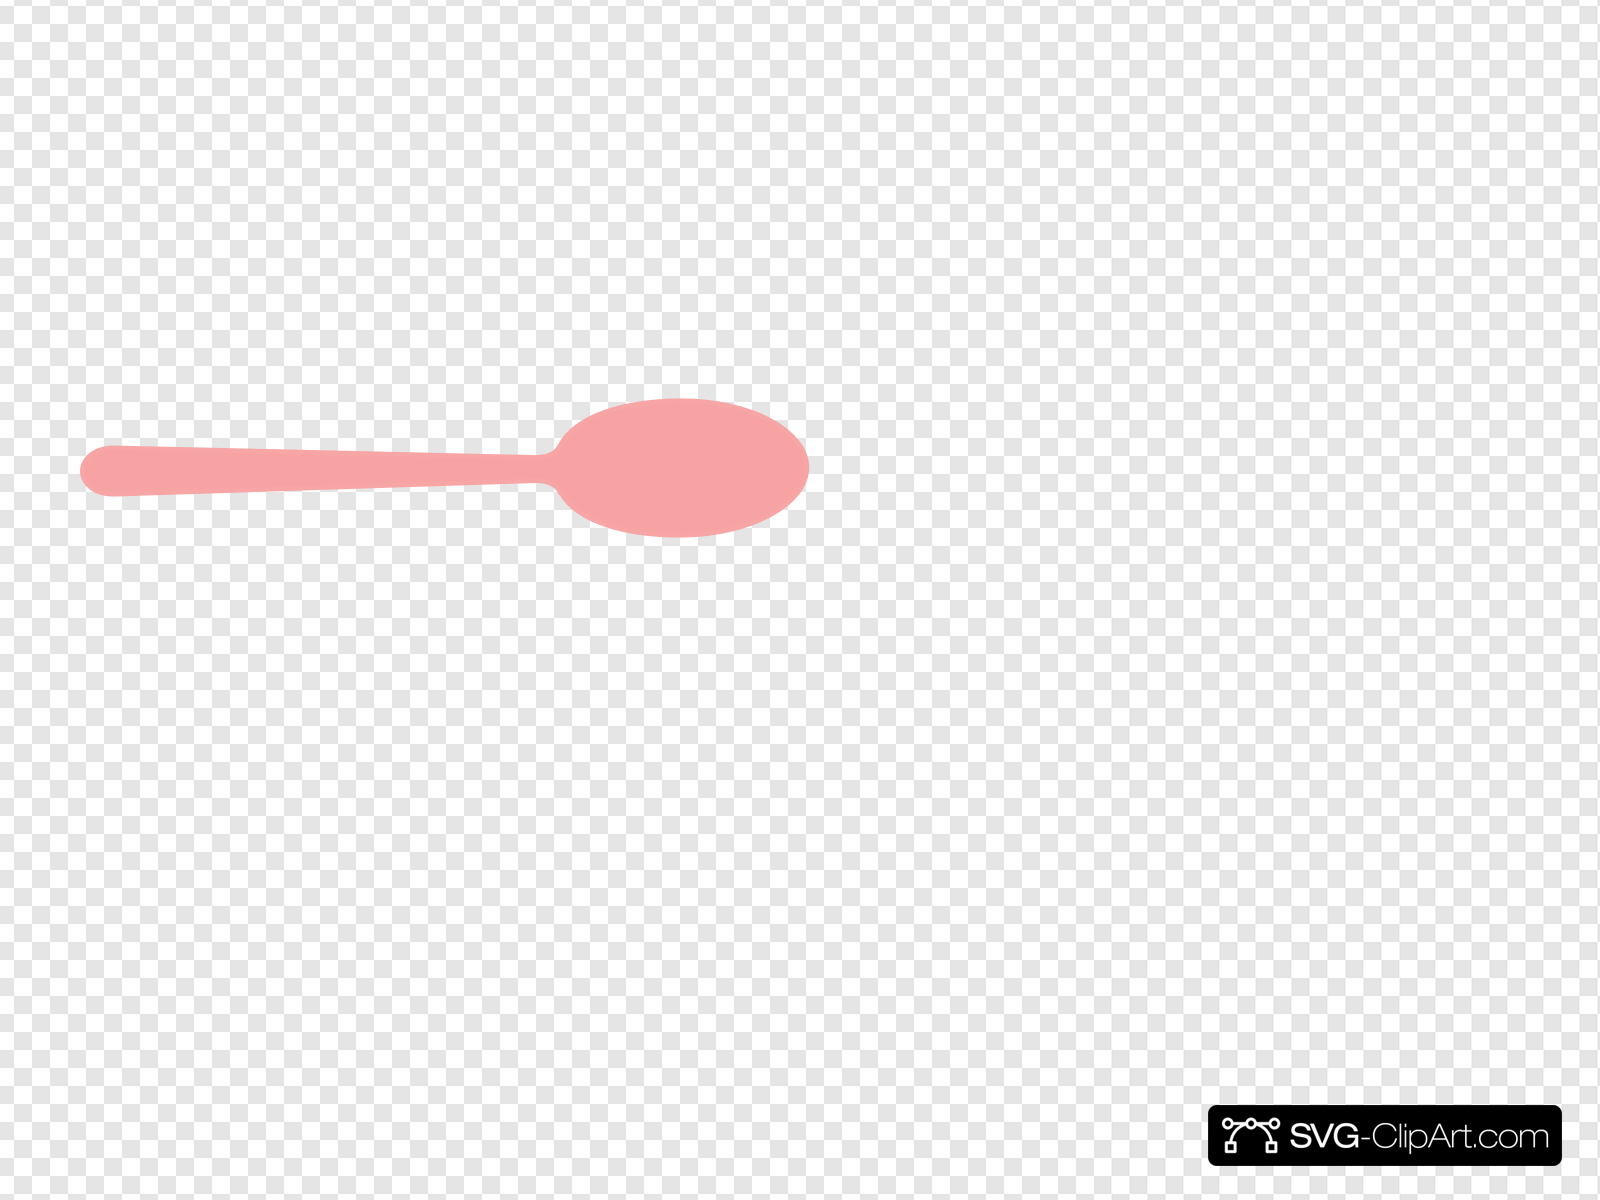 Pink Spoon Clip art, Icon and SVG